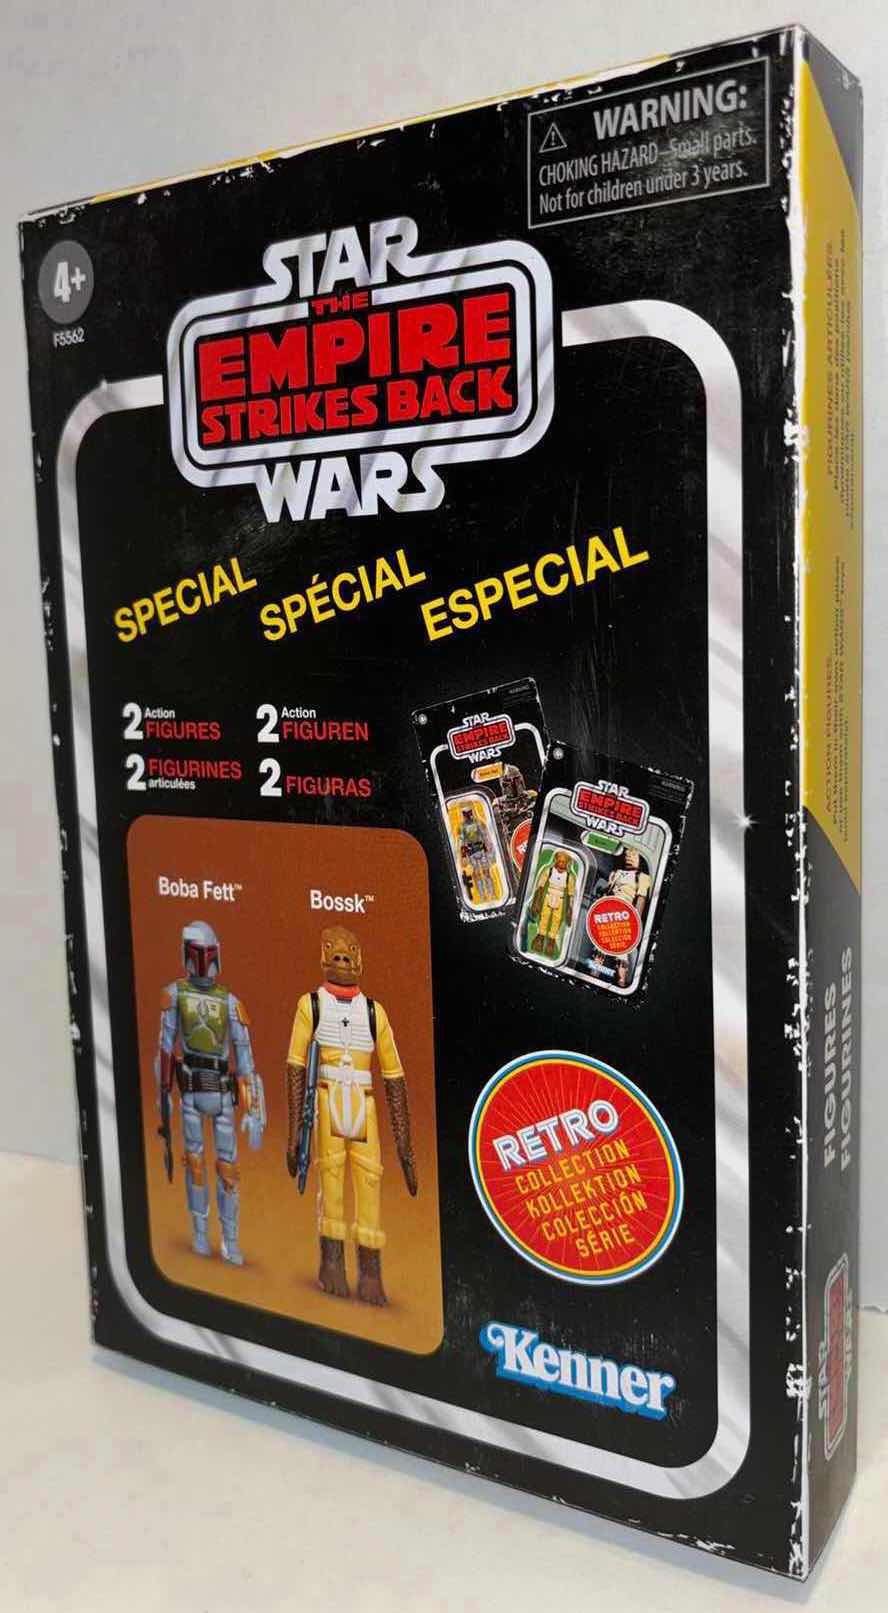 Photo 1 of NEW HASBRO KENNER STAR WARS THE EMPIRE STRIKES BACK RETRO COLLECTION 2-PACK ACTION FIGURES “BOBA FETT” & “BOSSK”